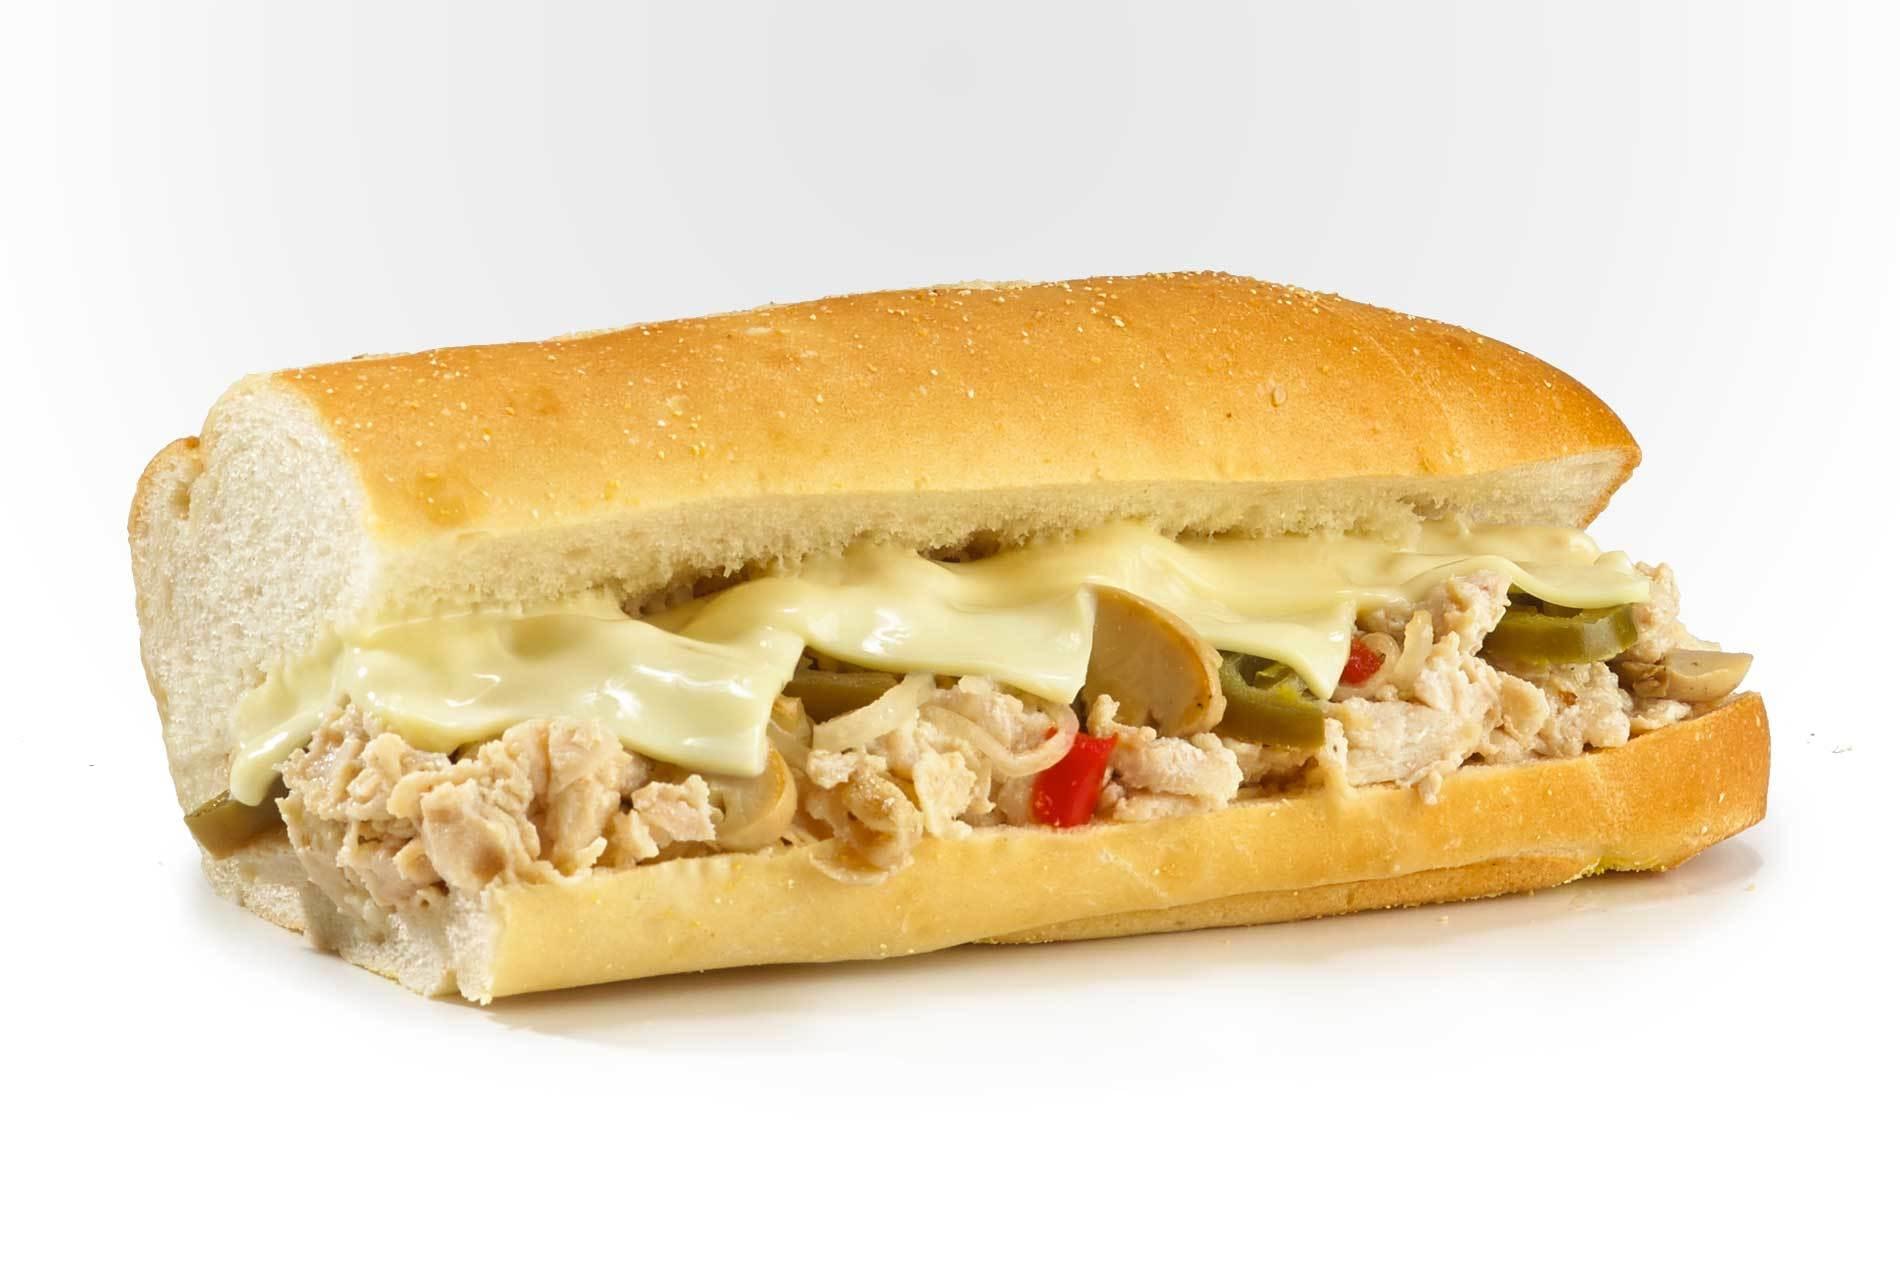 Jersey Mike's Giant Big Kahuna Chicken Cheese Steak Nutrition Facts